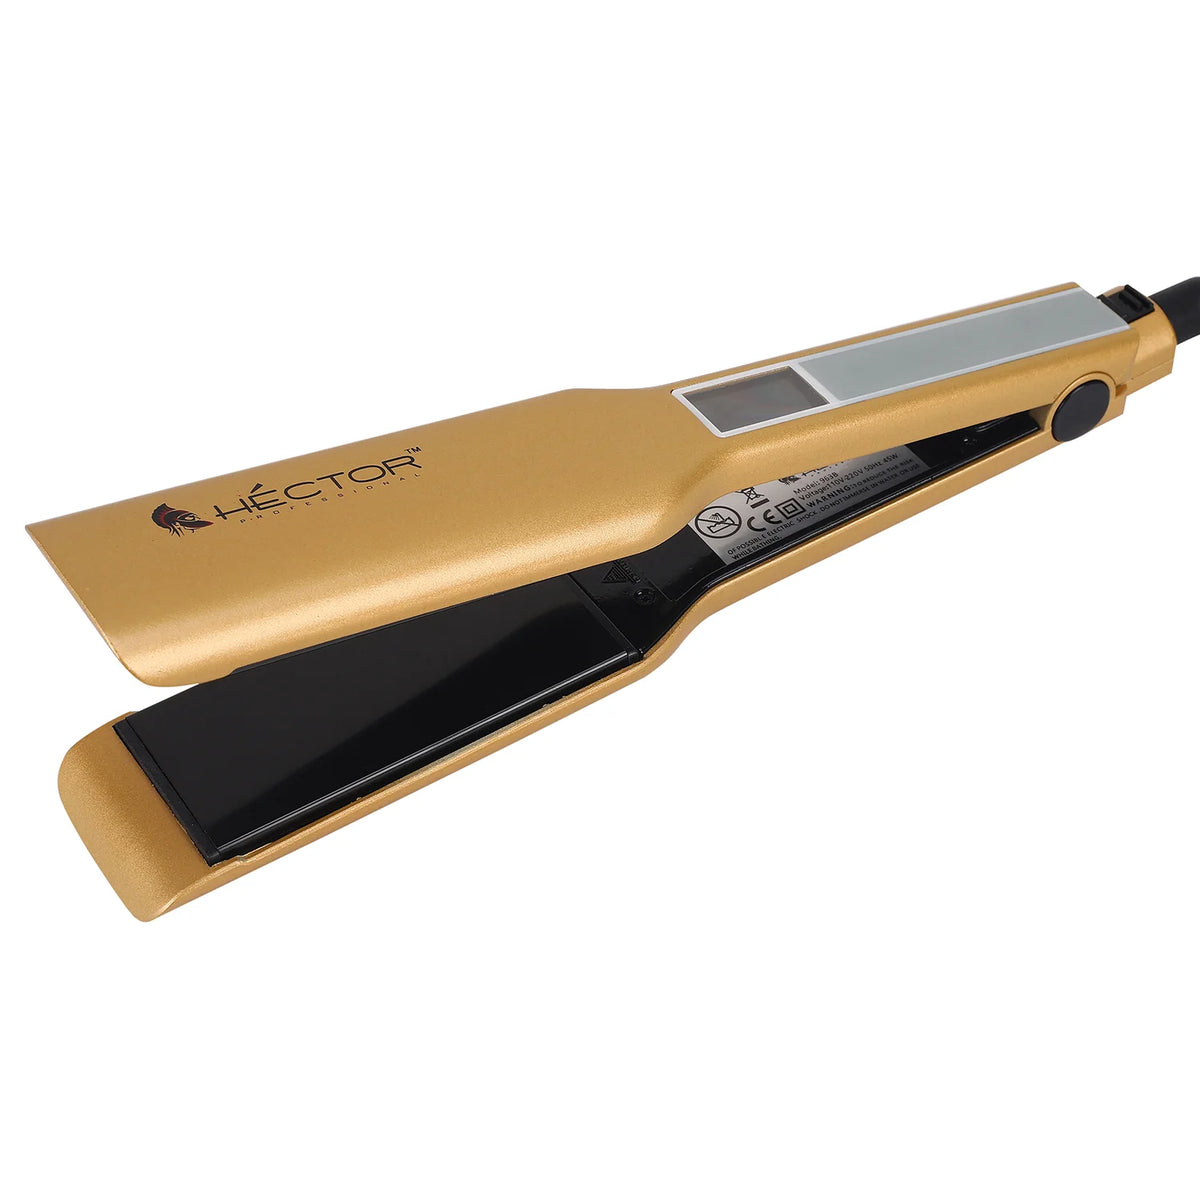 Hector Professional I Touch Hair Straightener - Broad